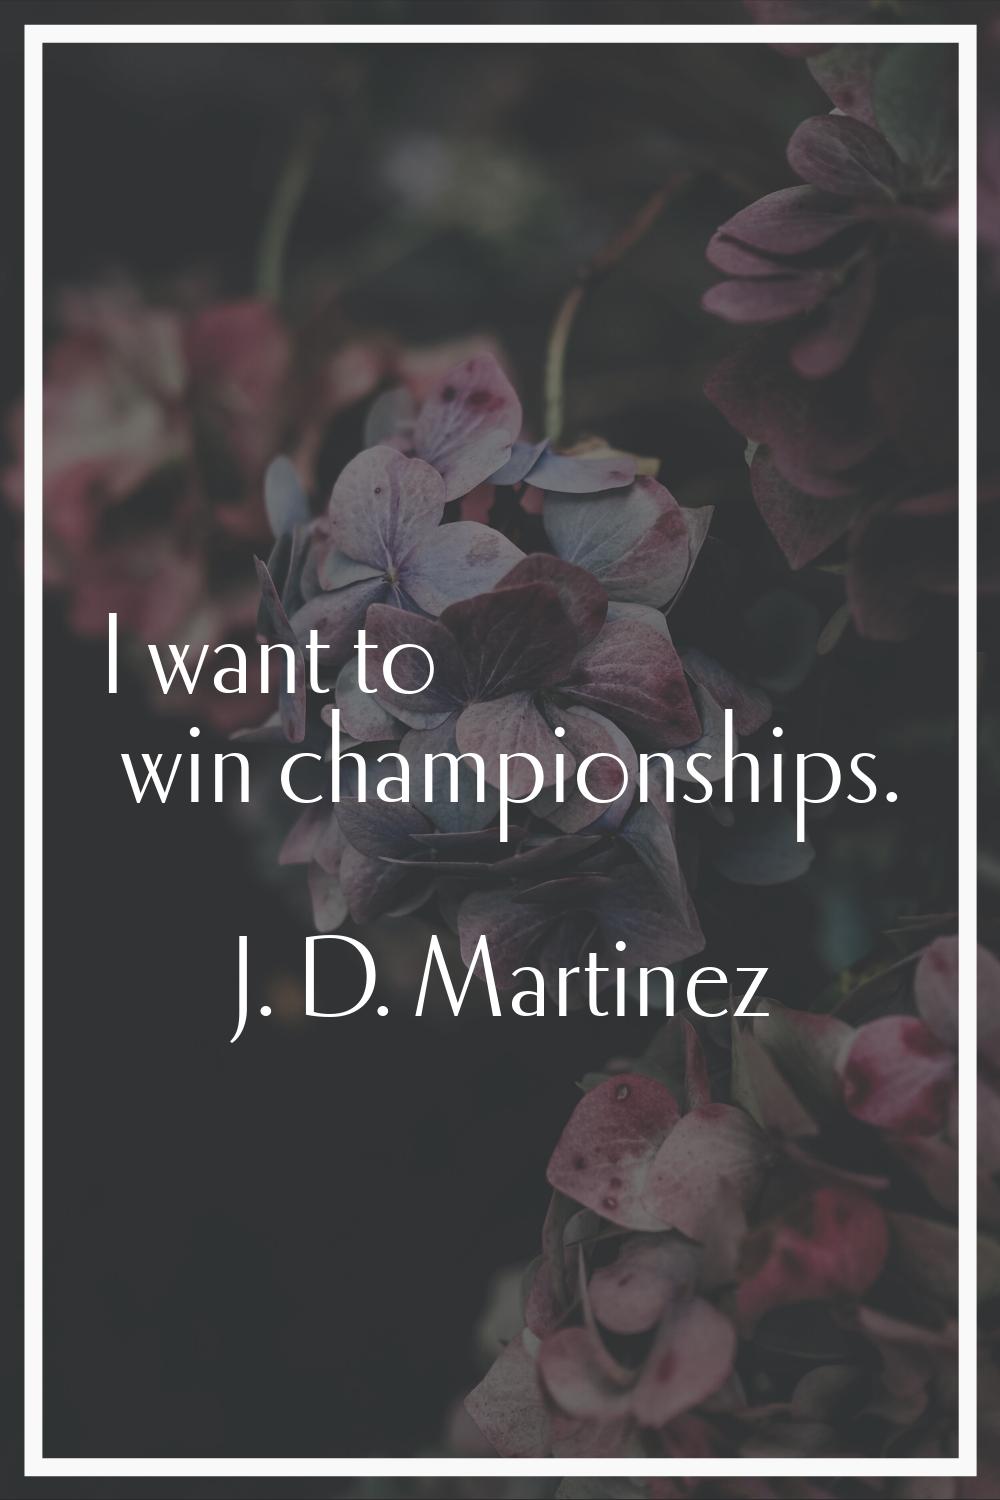 I want to win championships.